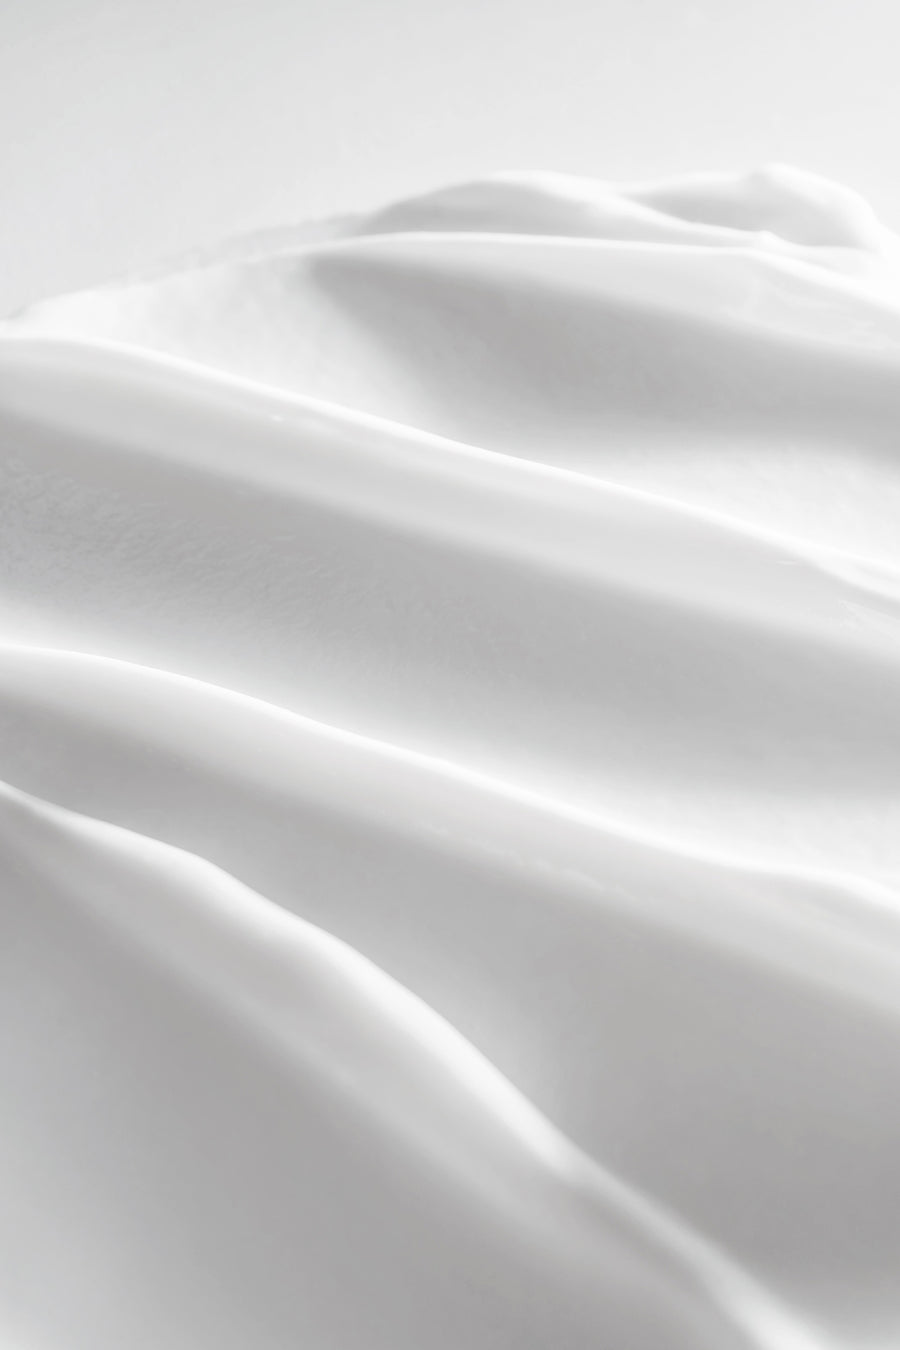 waves of creamy white body butter